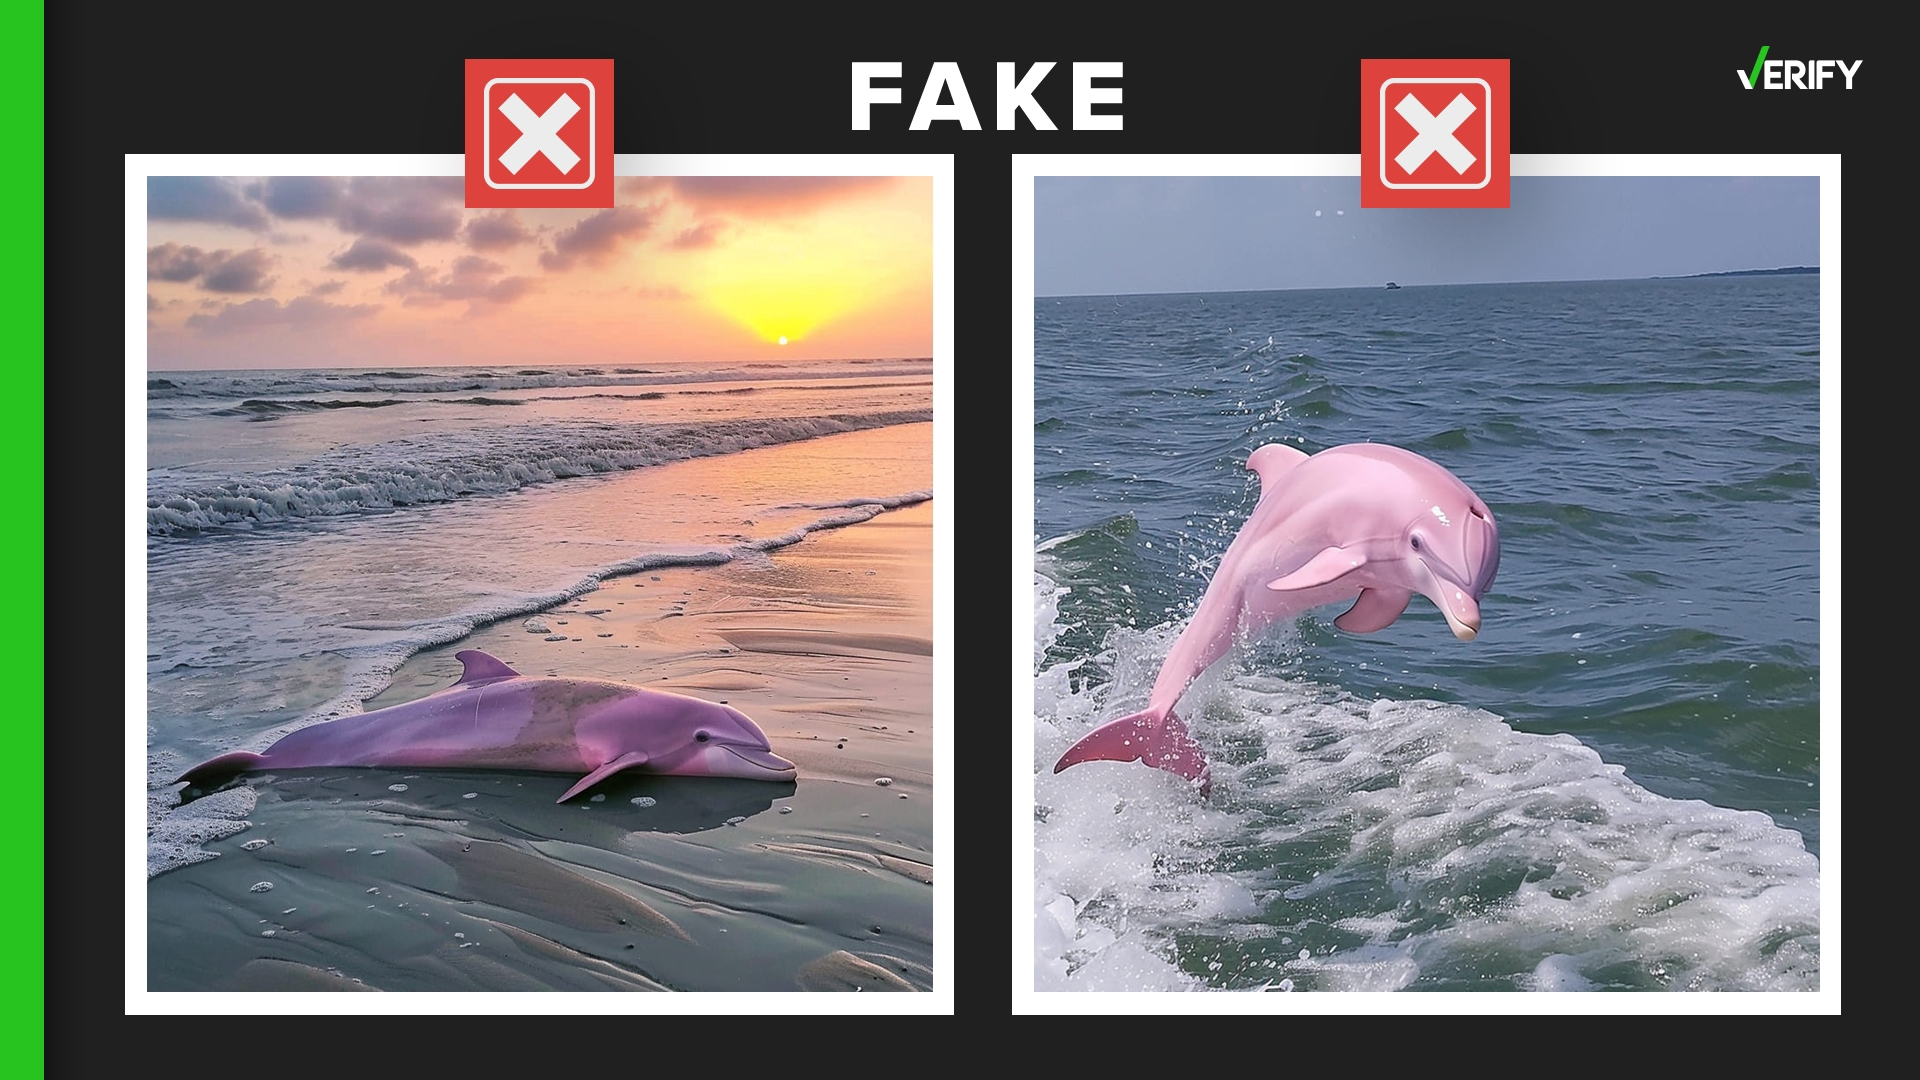 There is such a thing as a pink dolphin. But photos claiming to show one in North Carolina are altered or AI-generated.